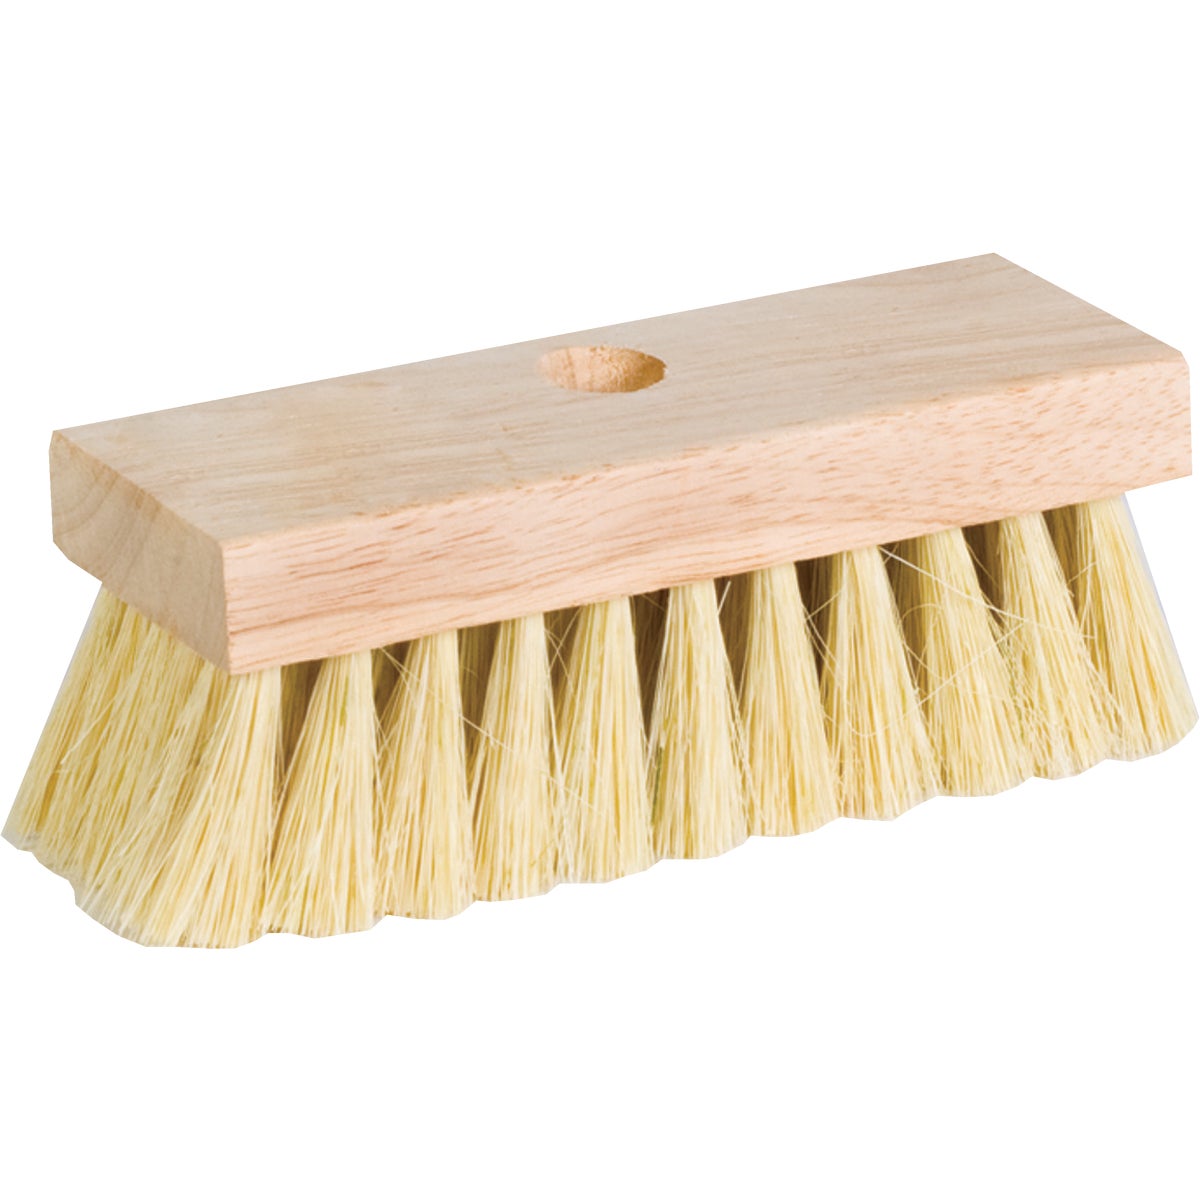 DQB Erie Roof 7 In. x 2 In. Tapered Handle Hole Roof Brush